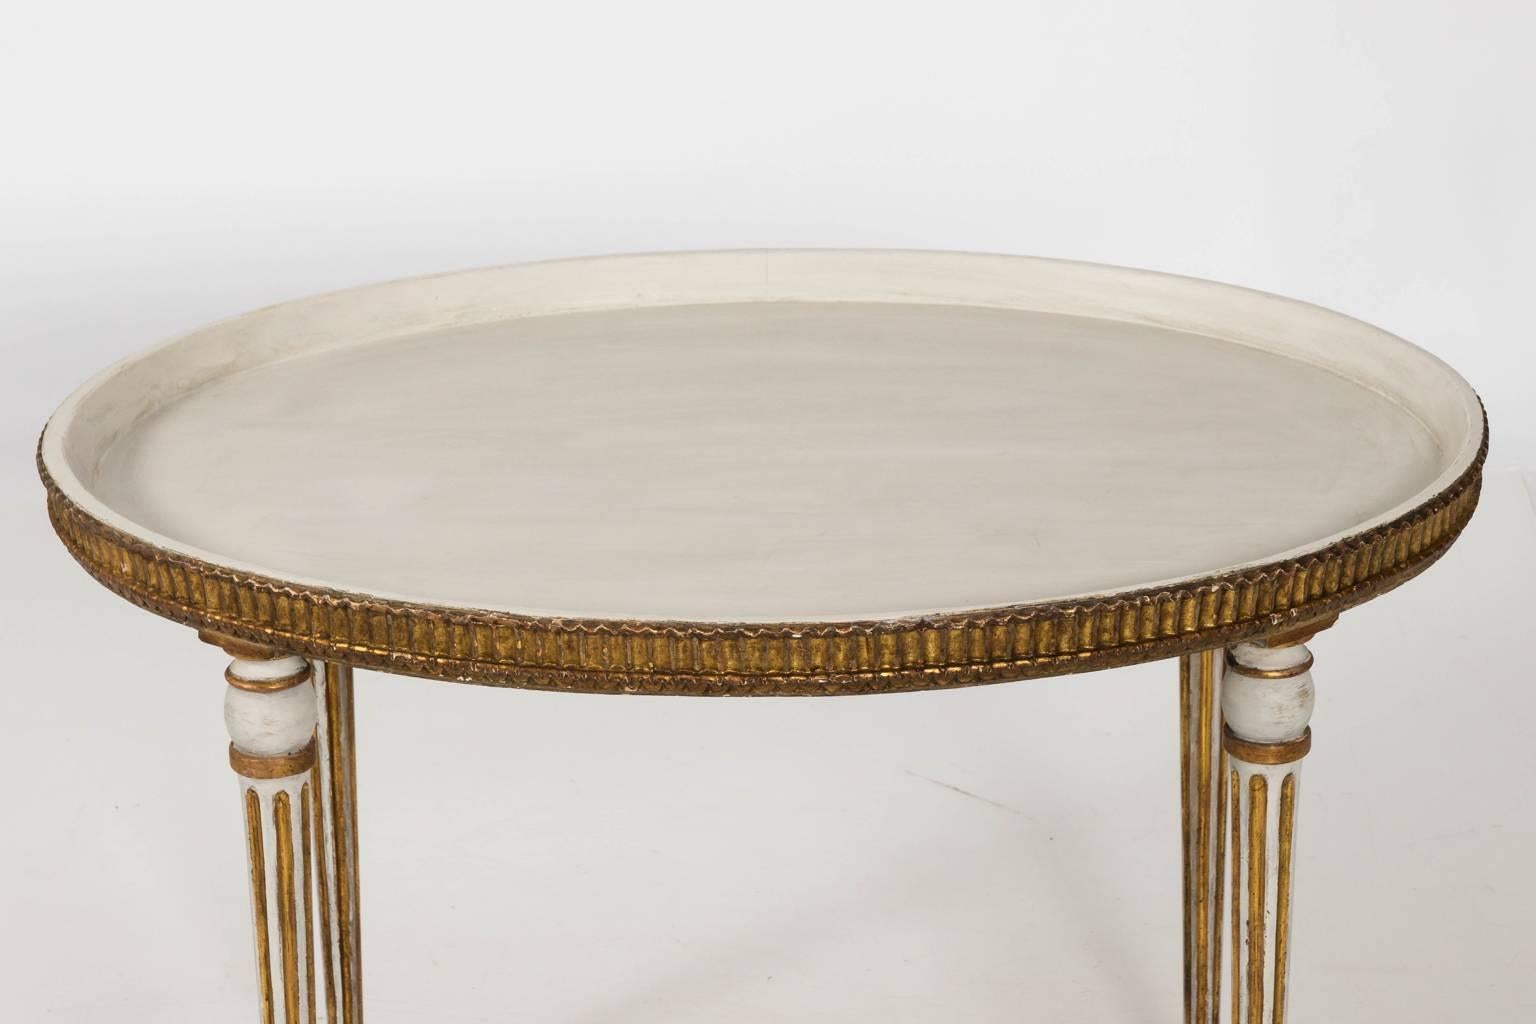 Gilt 19th Century Neoclassical Oval Center Table